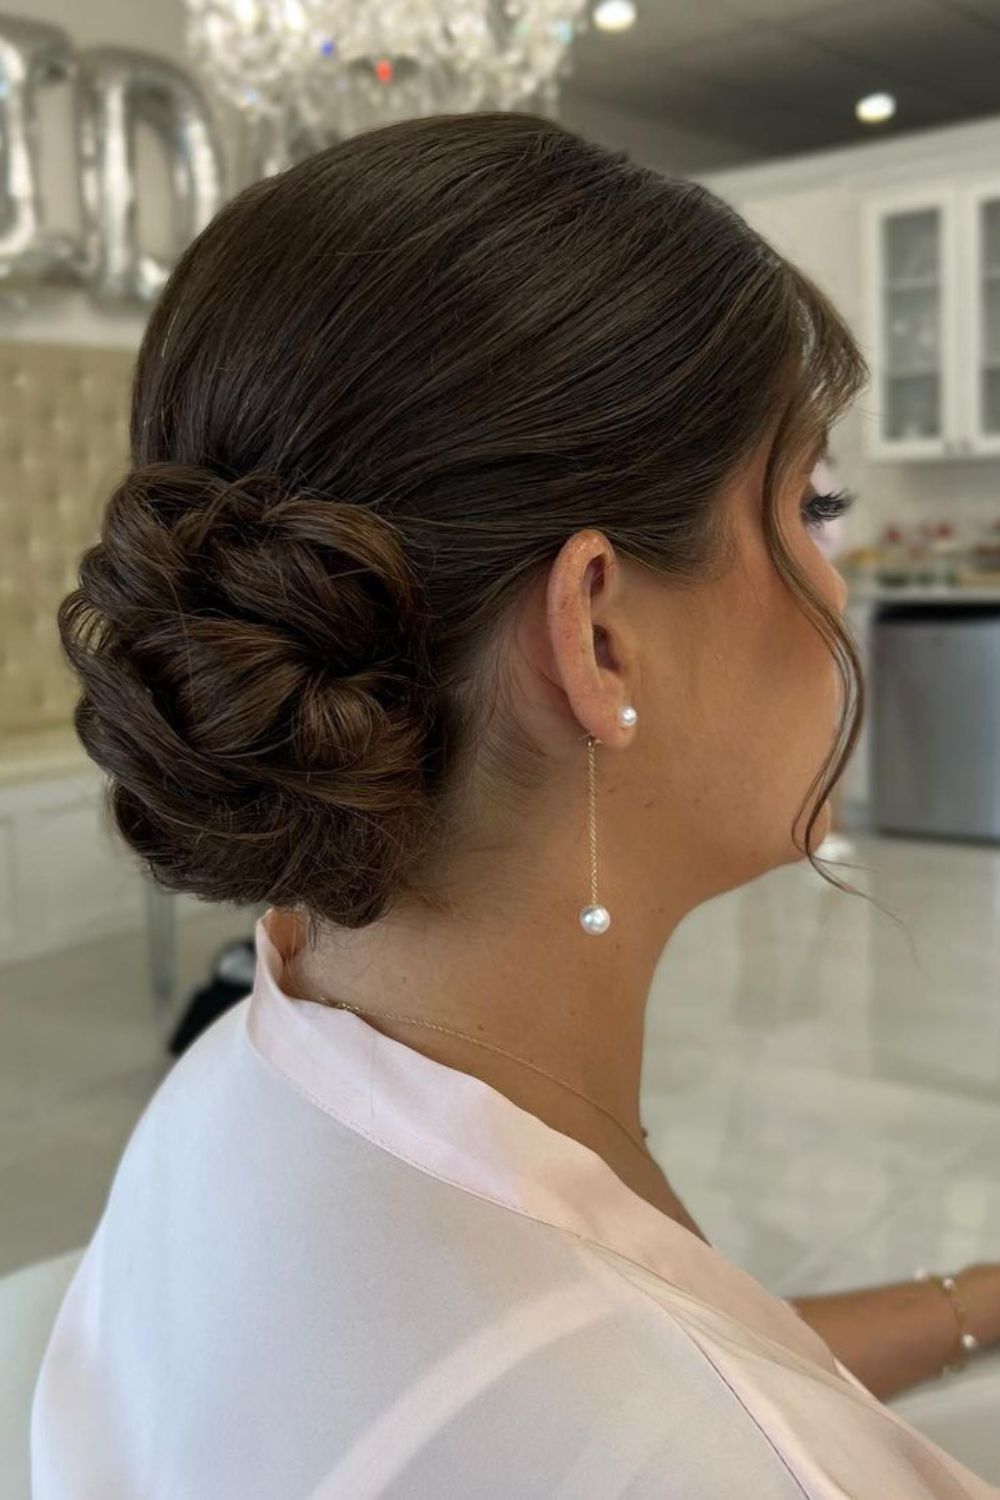 A woman with a brown braided low bun.